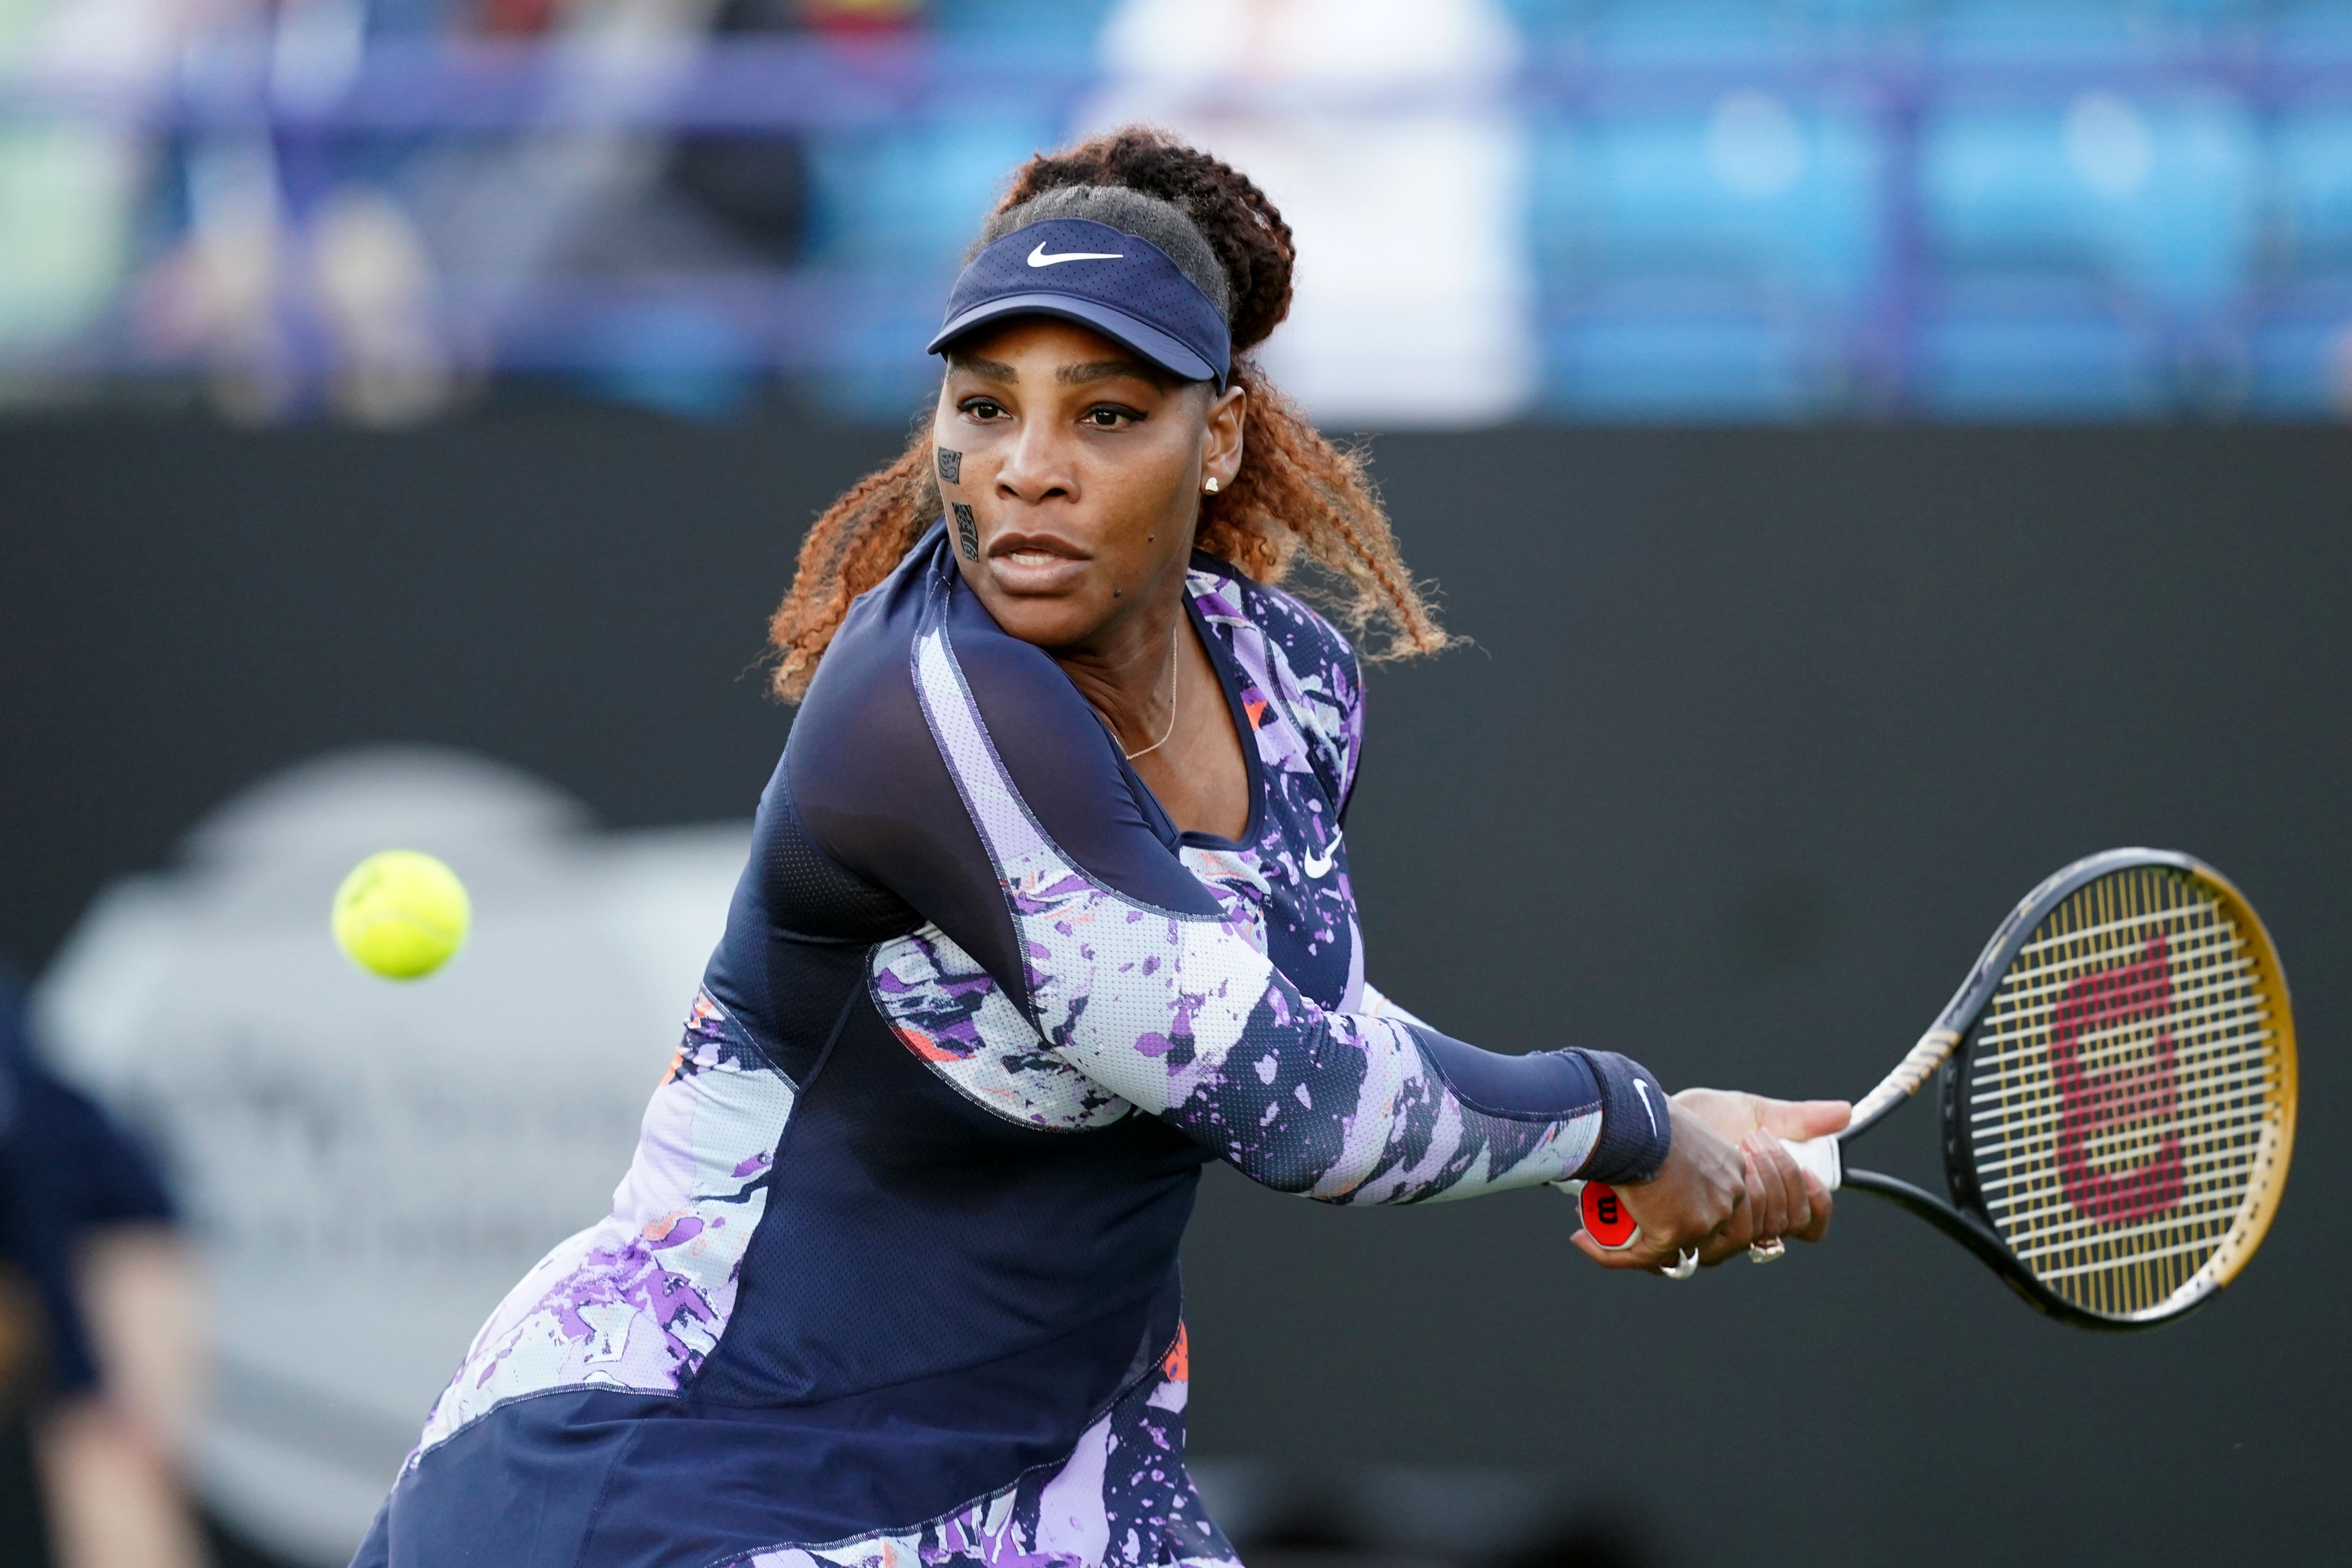 Serena Williams on the tennis court in Eastbourne, UK, in 2018